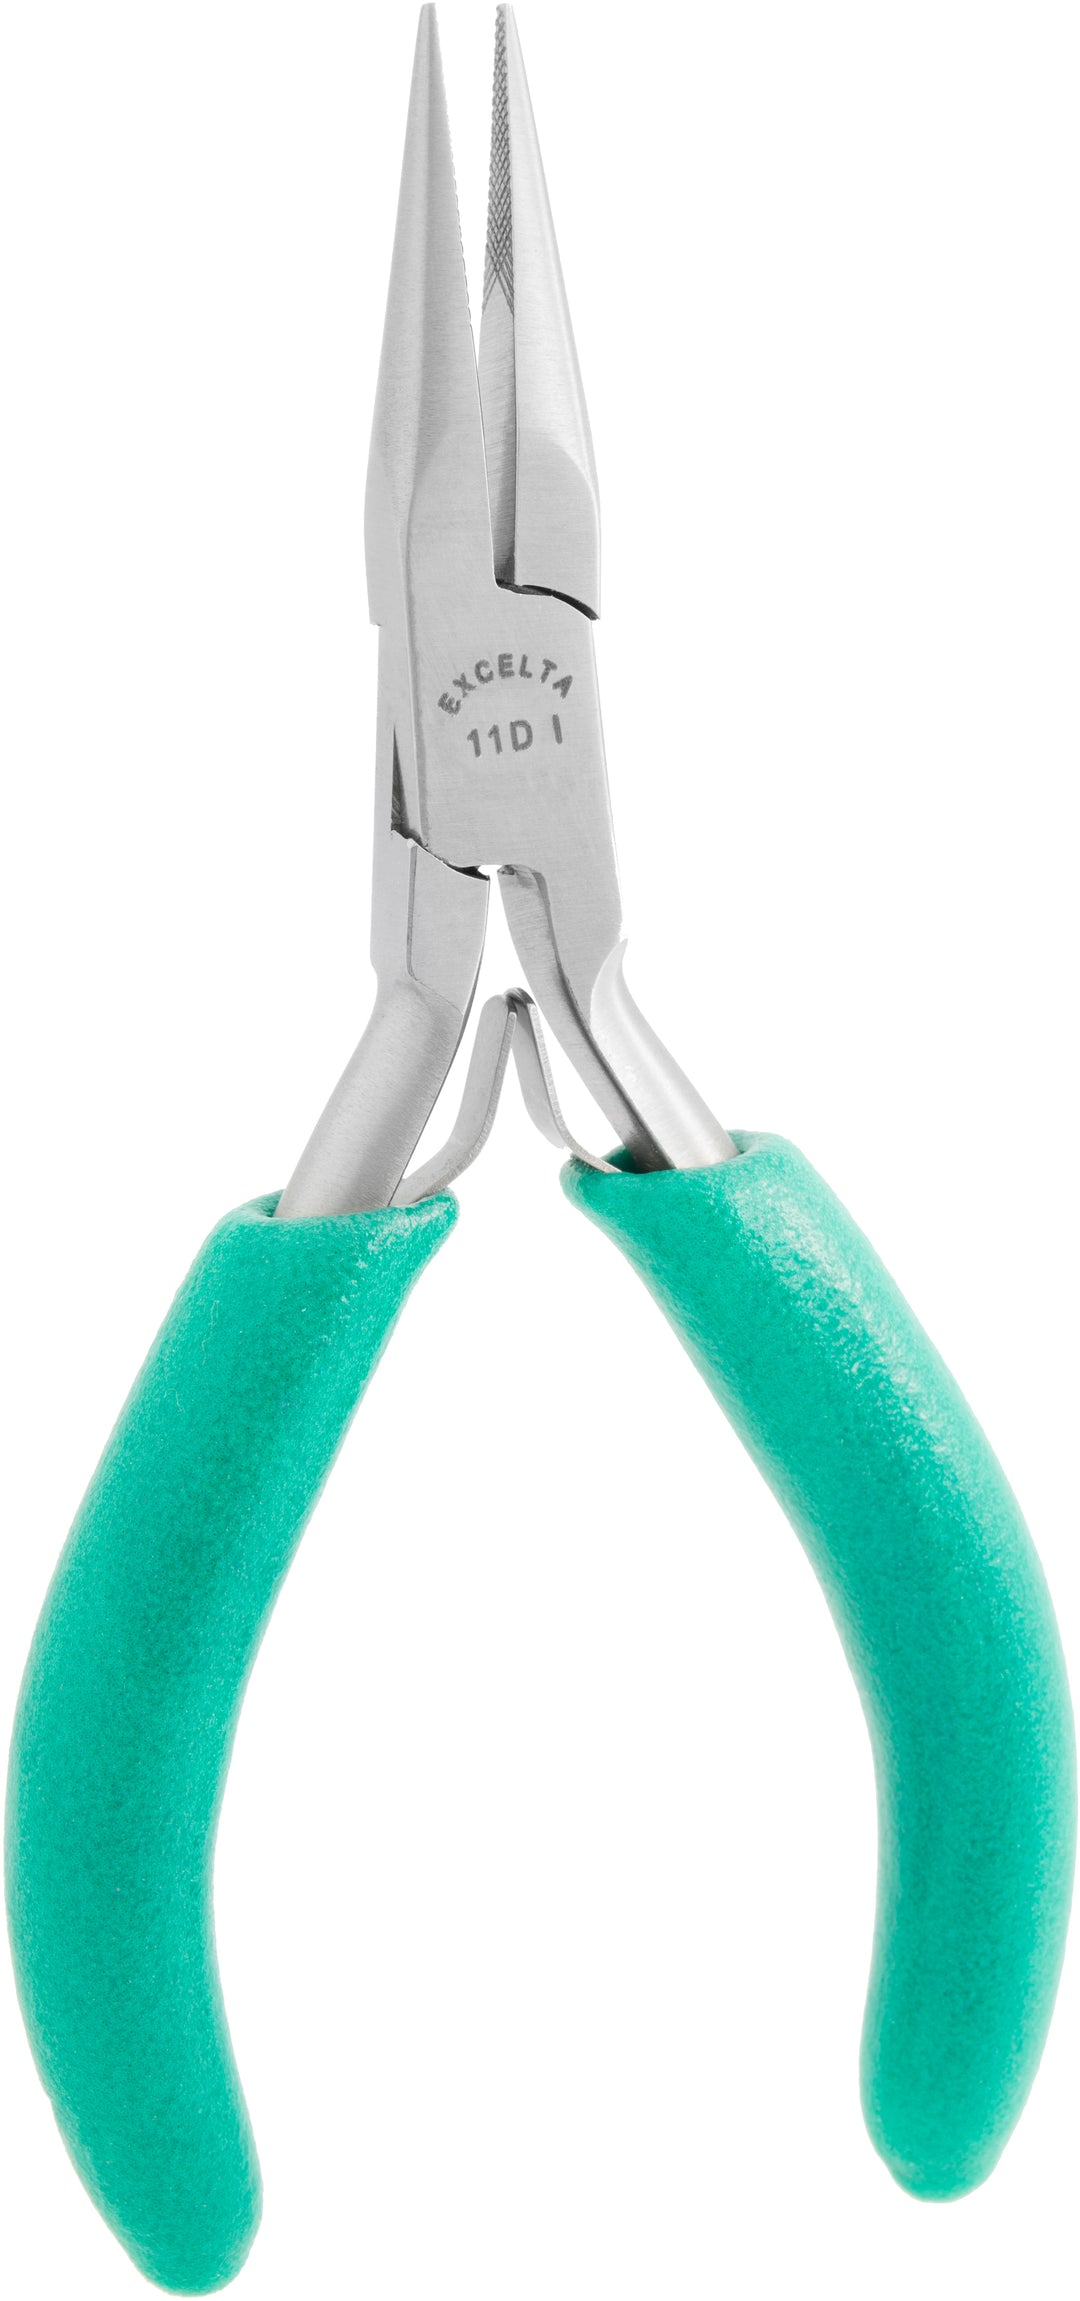 Excelta 11DI Pliers - 3 Star Medium Chain Nose - SS - Serrated Jaws